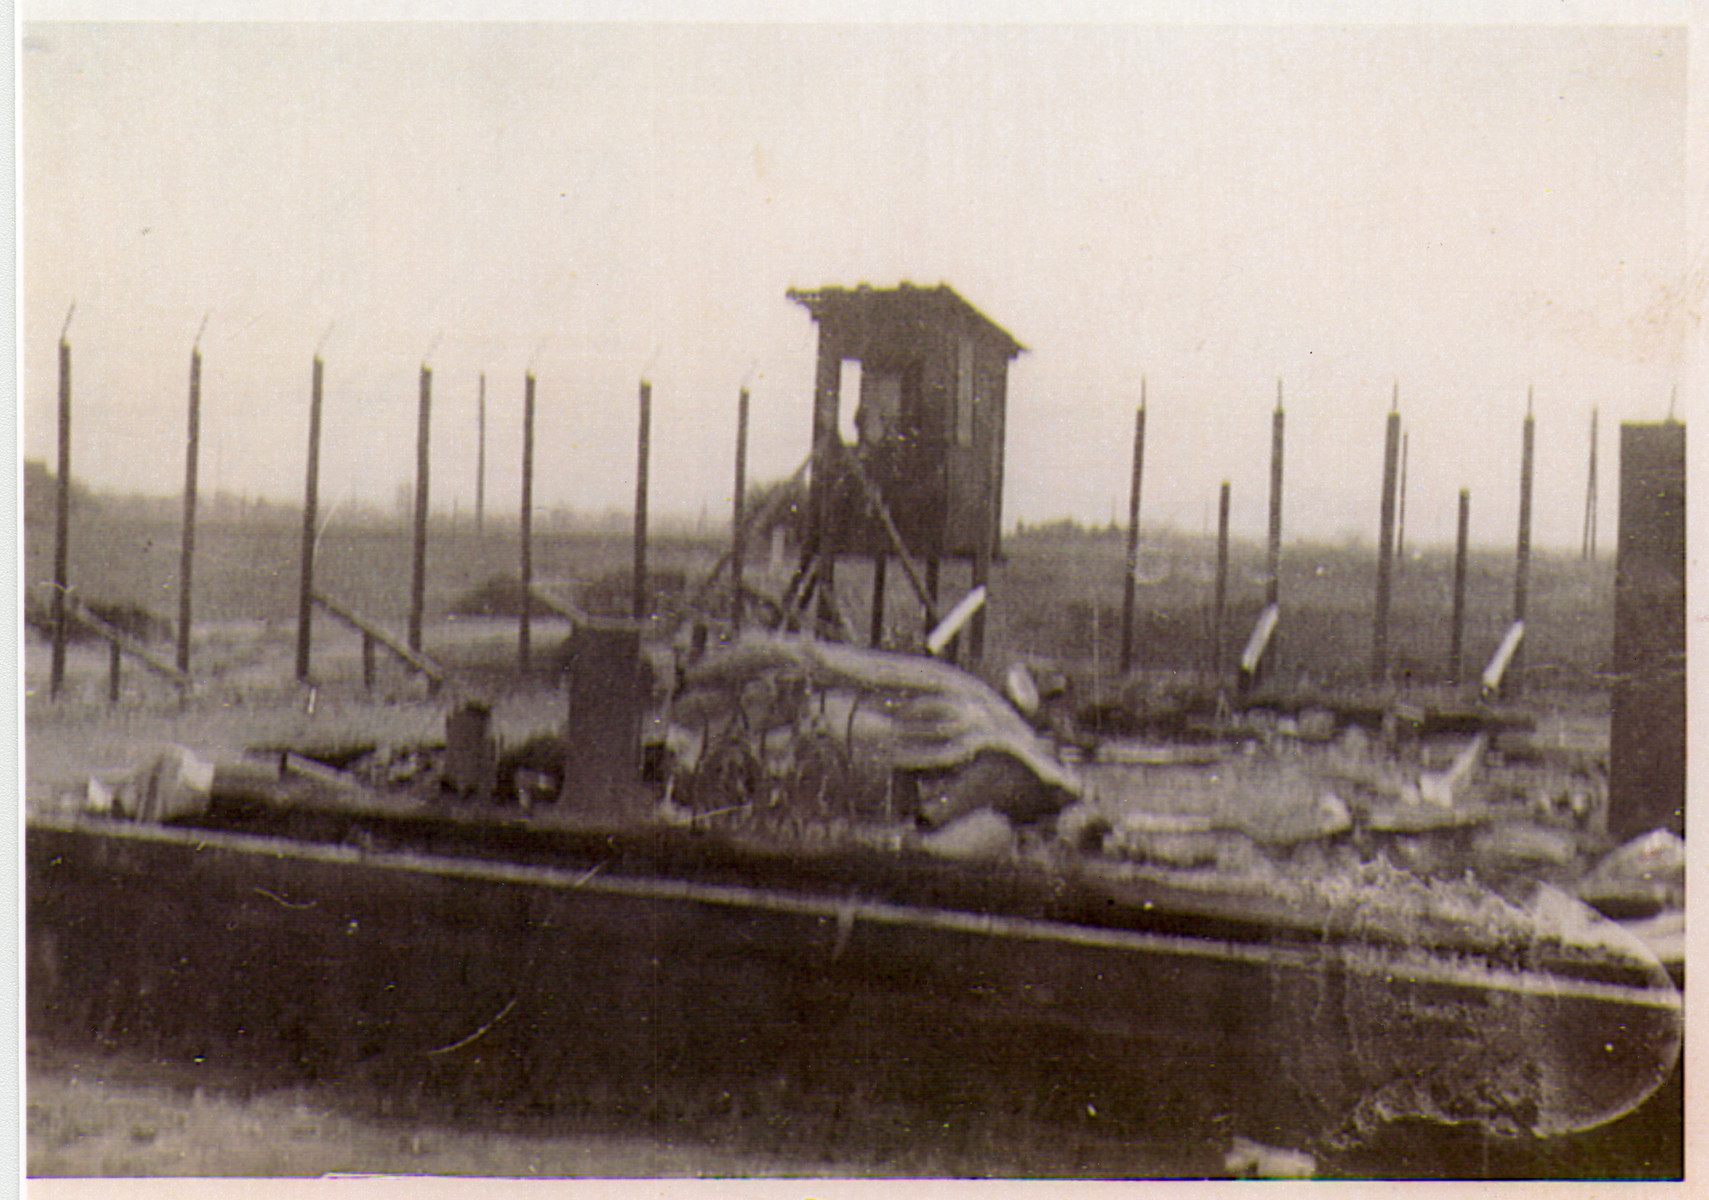 View of the Hanover-Ahlem concentration camp after liberation.